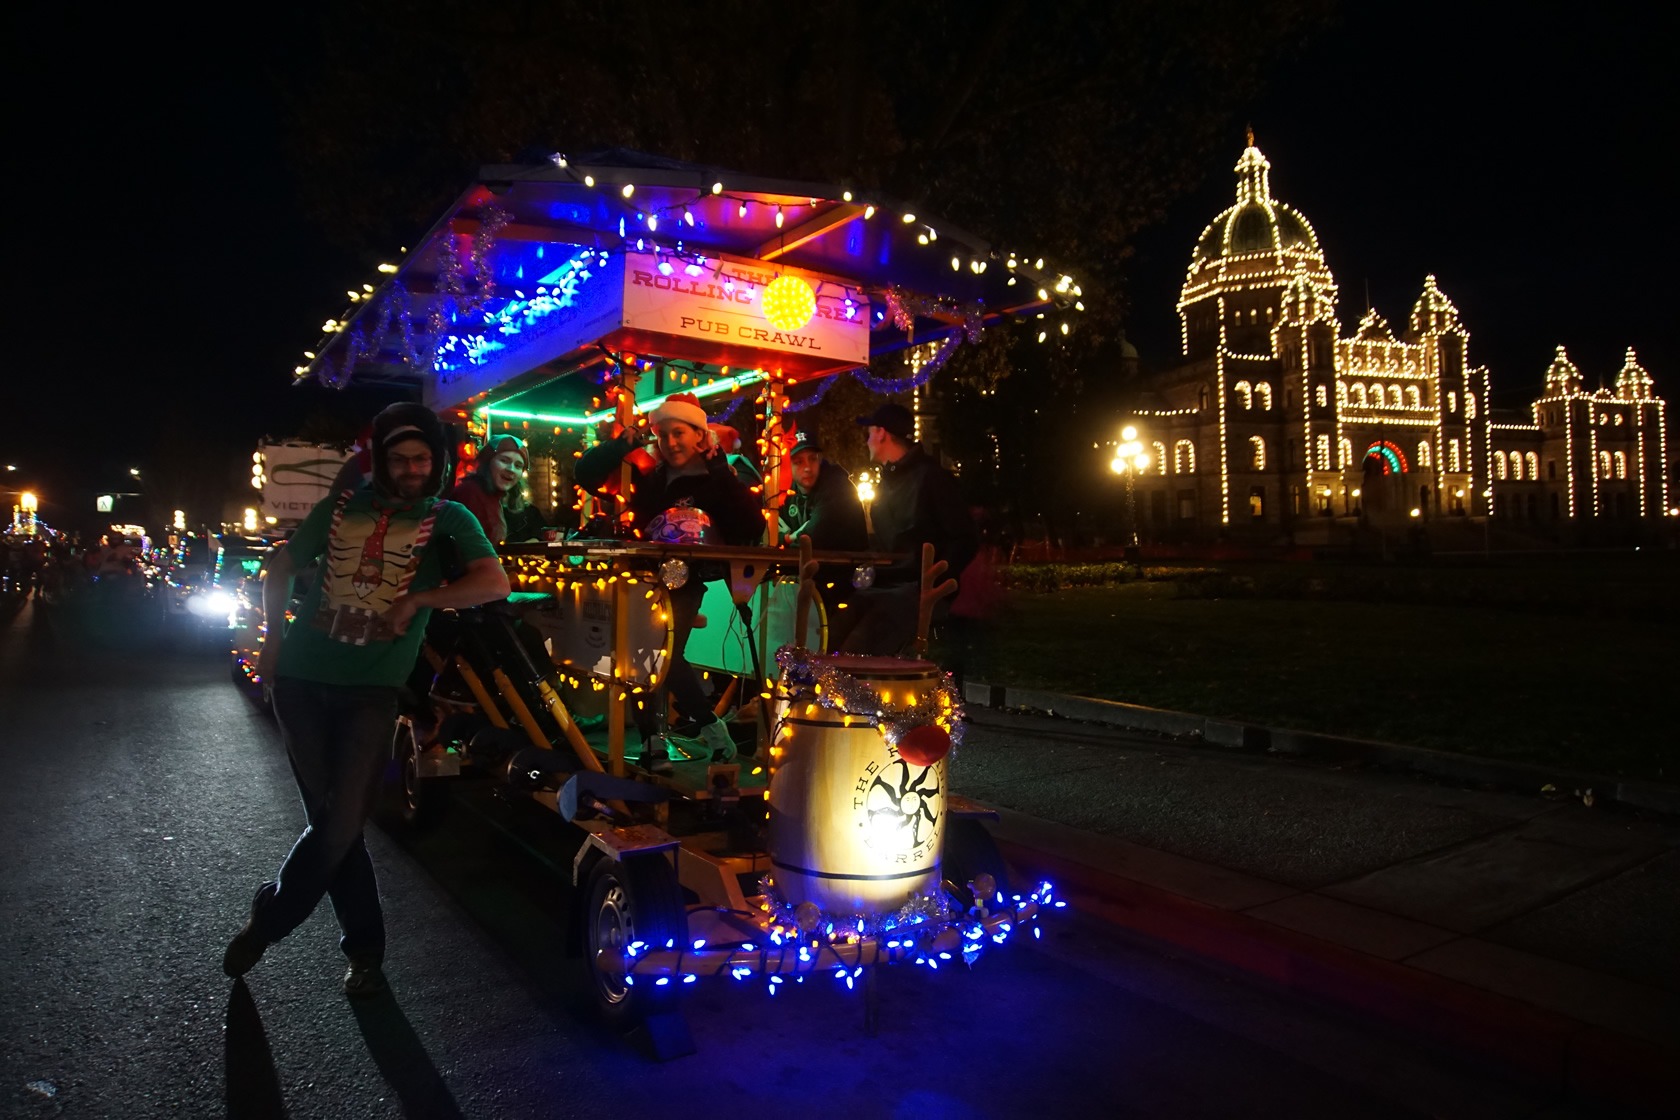 Night time front view of the Rolling Barrel vehicle decorated with Christmas lights and parked in front of the Victoria Parliament Building.